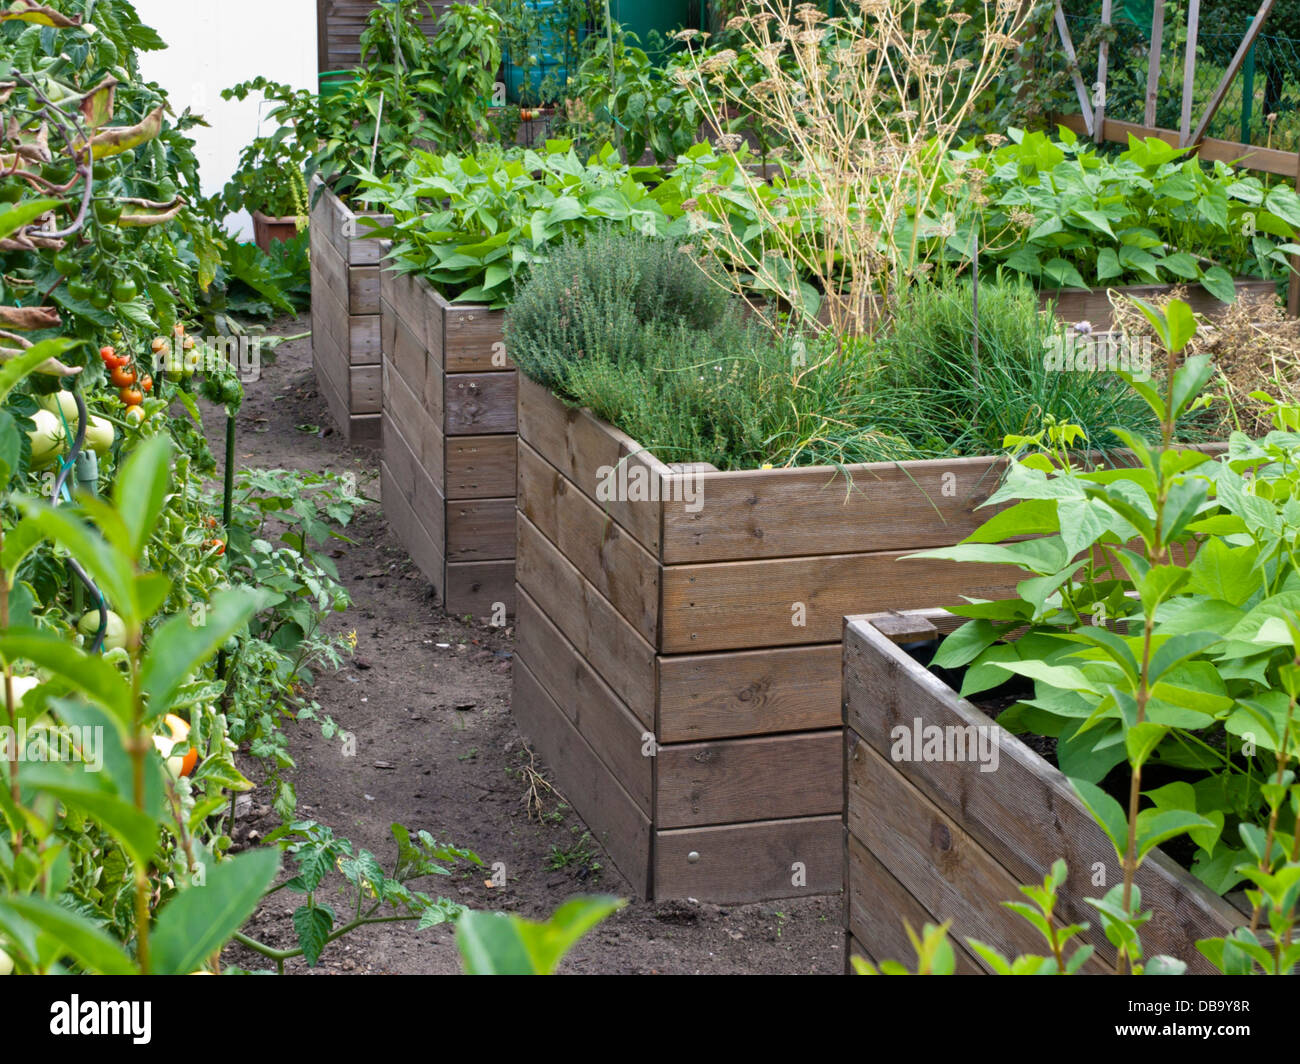 Raised beds with vegetables and herbs Stock Photo - Alamy